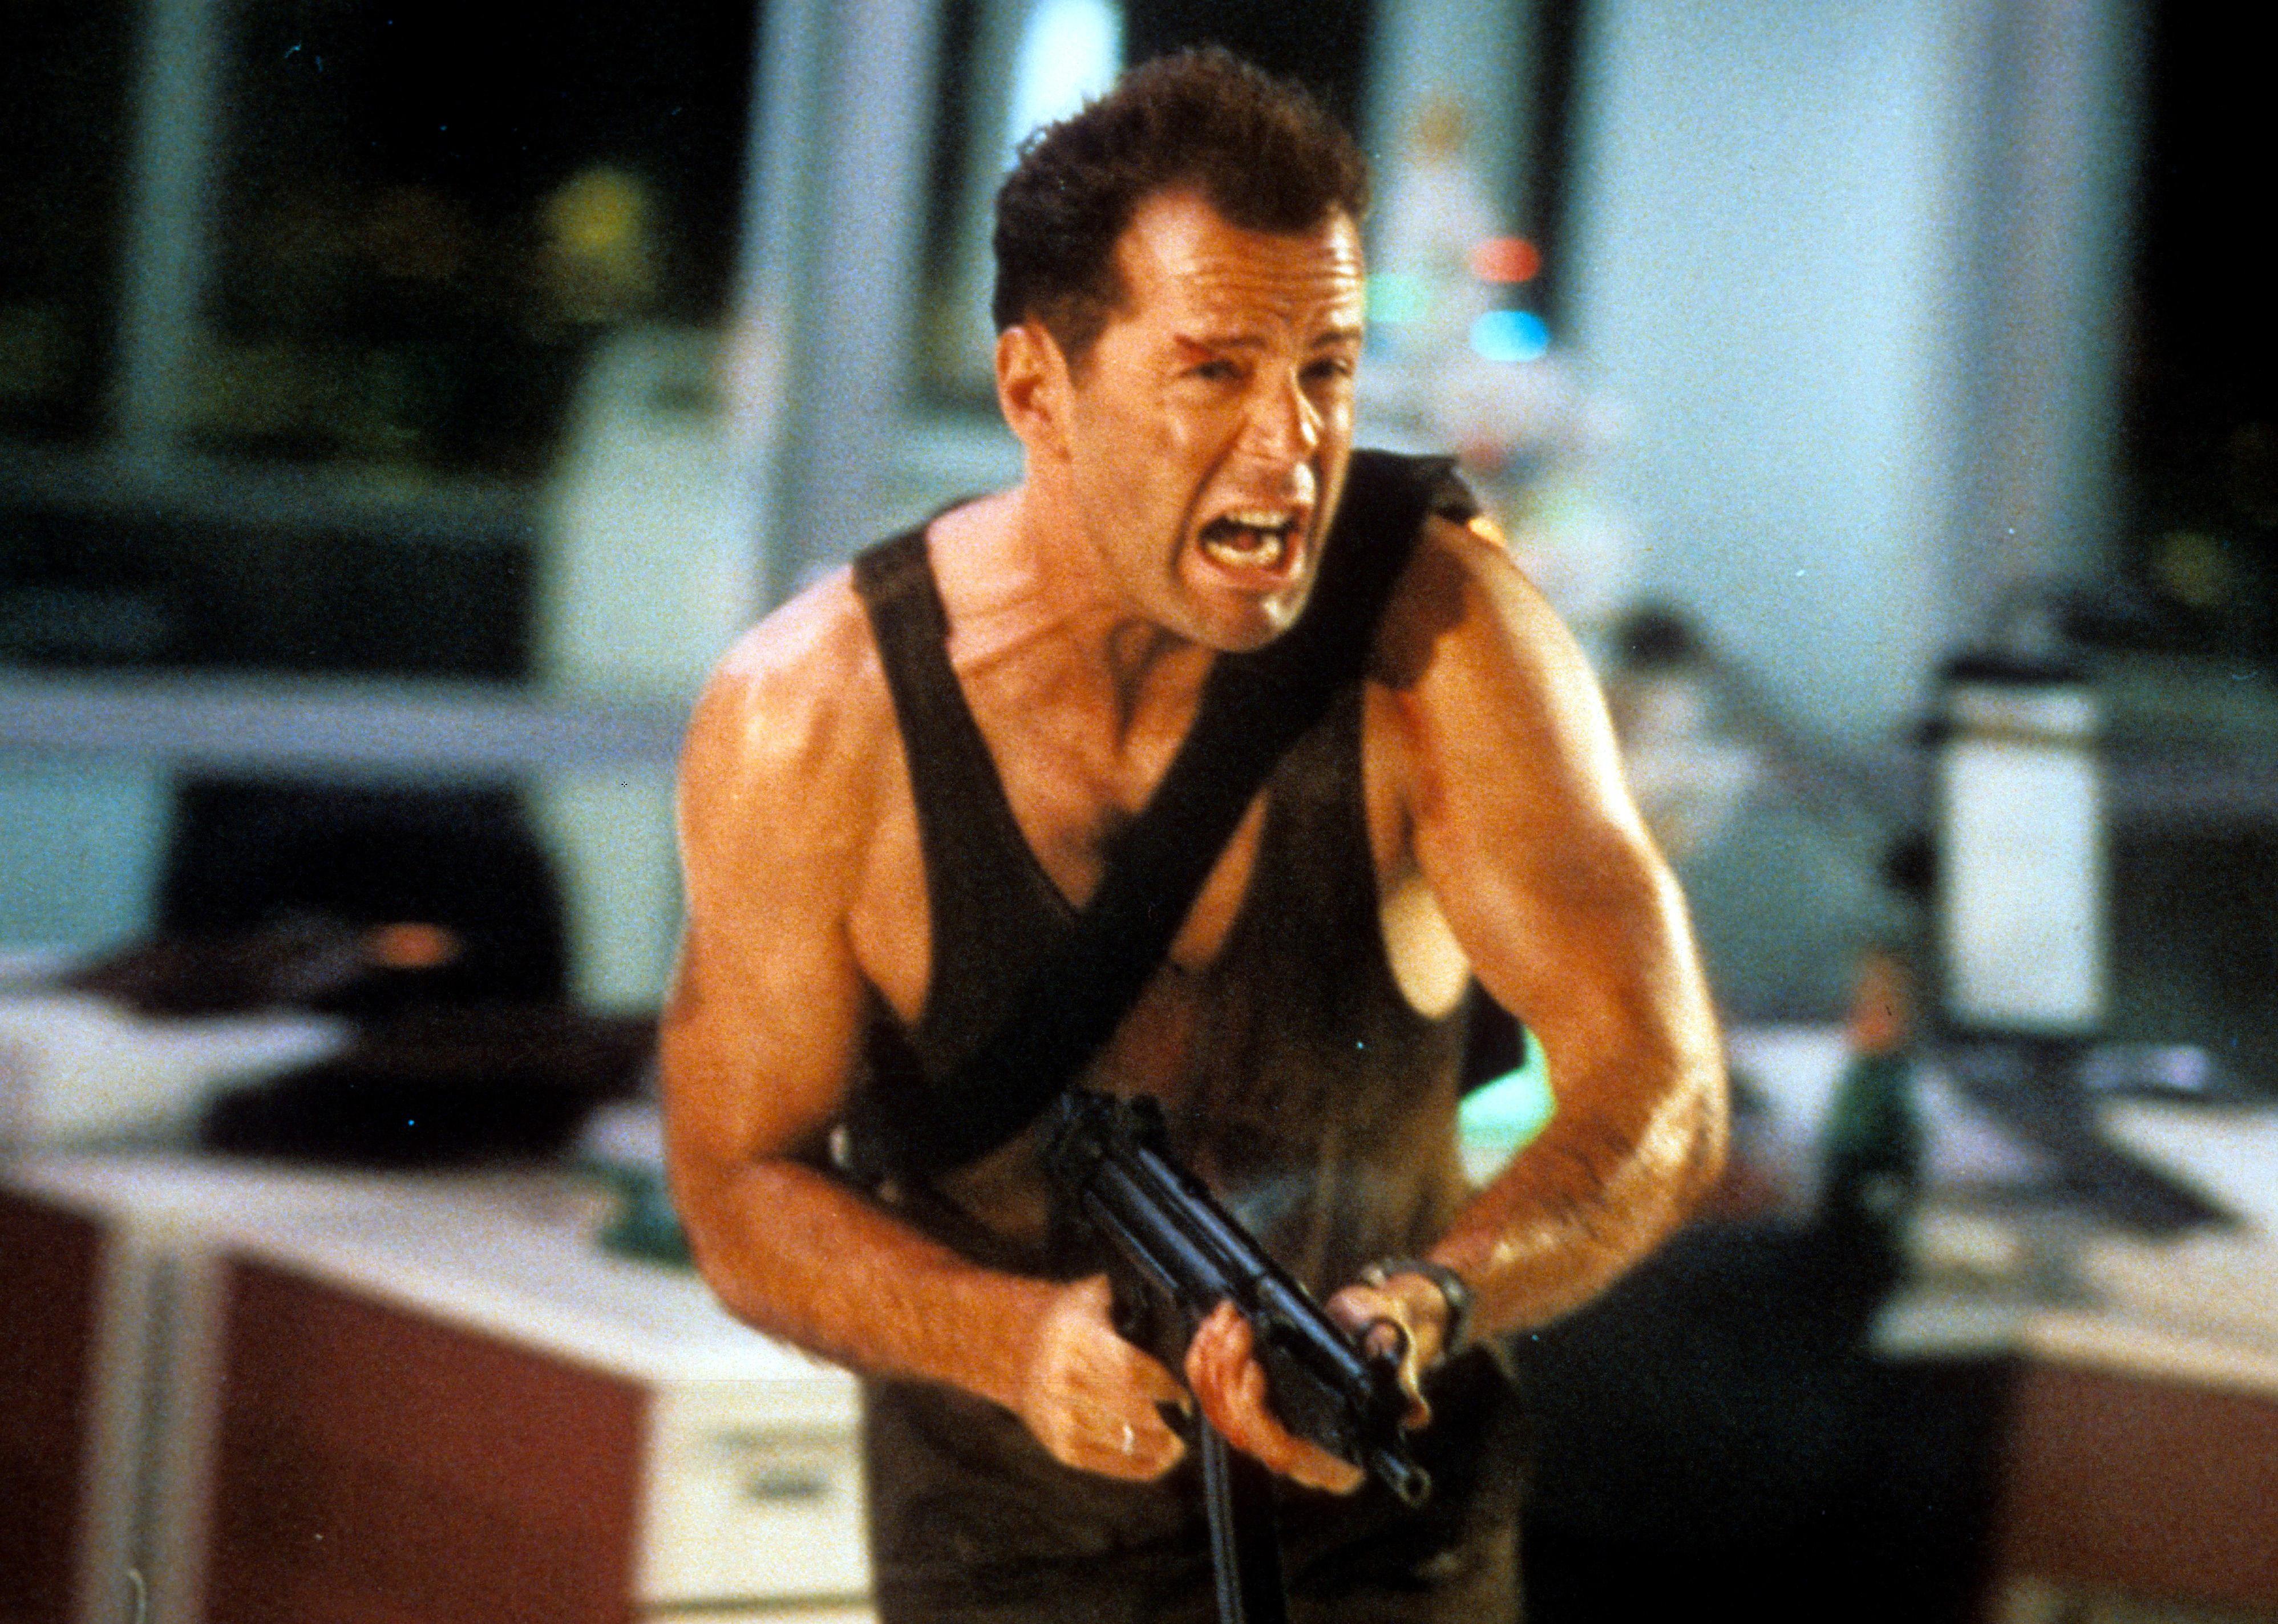 Bruce Willis running and screaming with a gun in his hands.